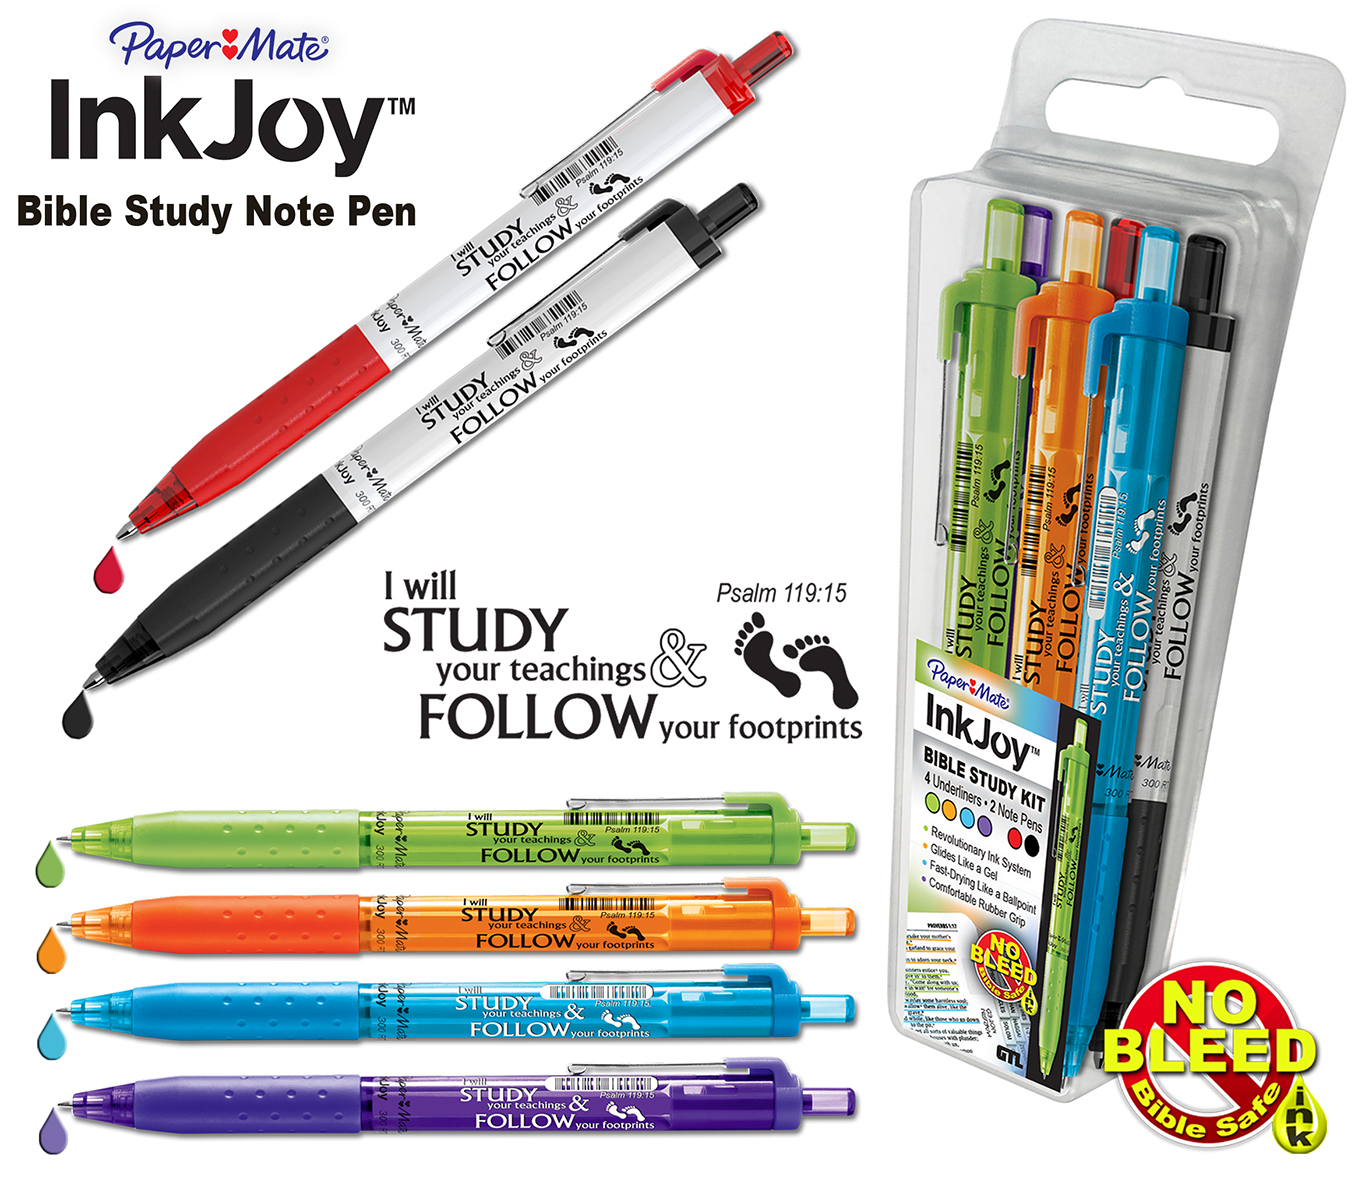 Paper Mate Inkjoy Bible Study (Other) 